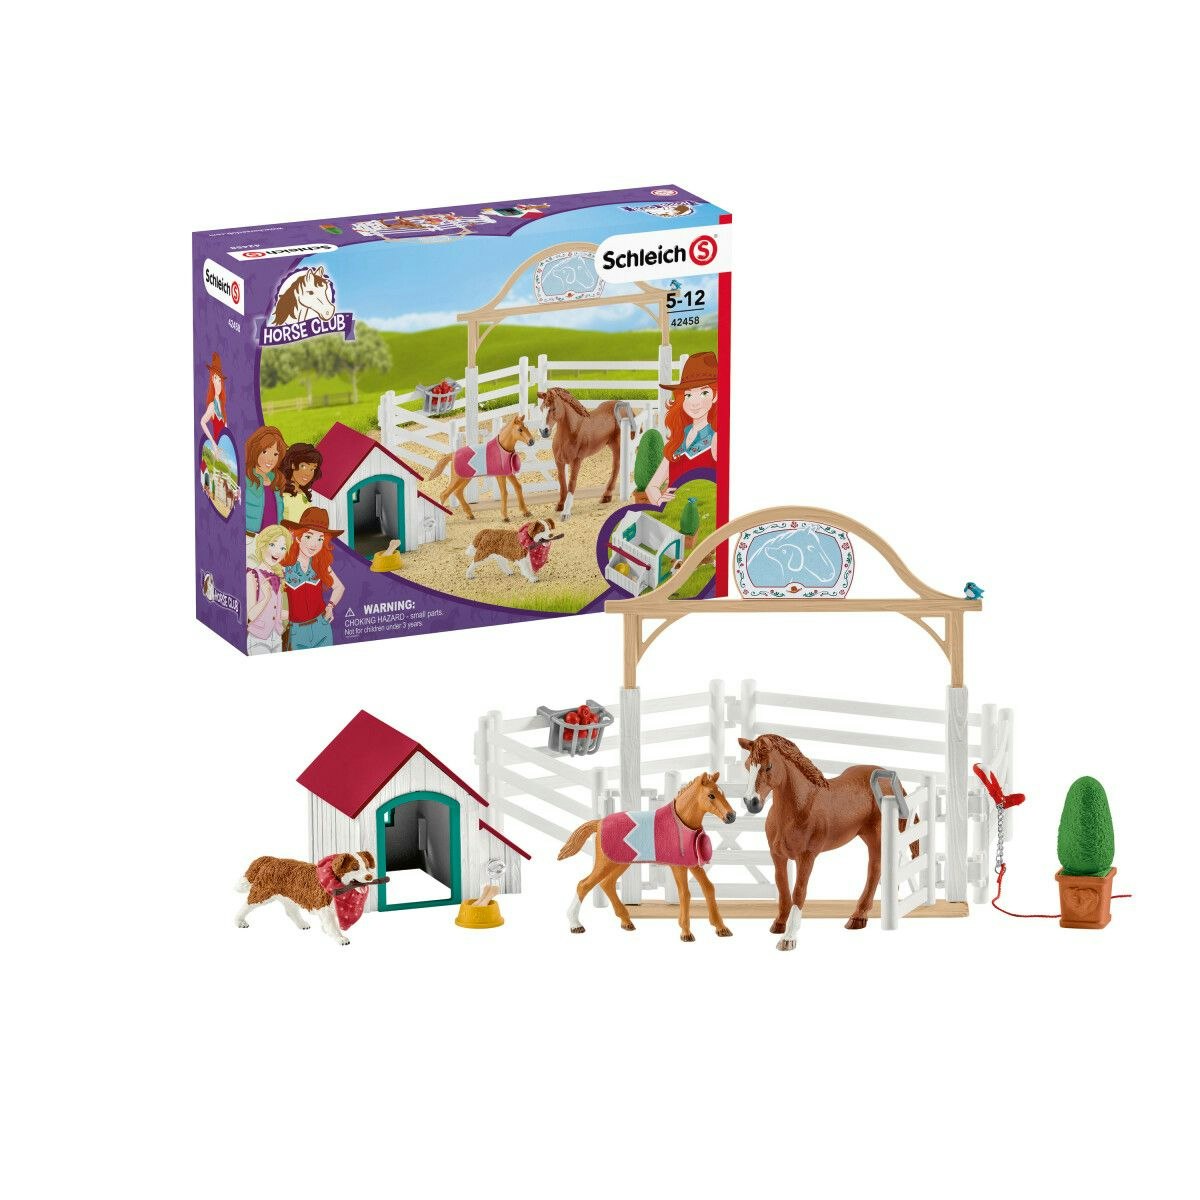 Schleich- Hannahs guest horses with Dog